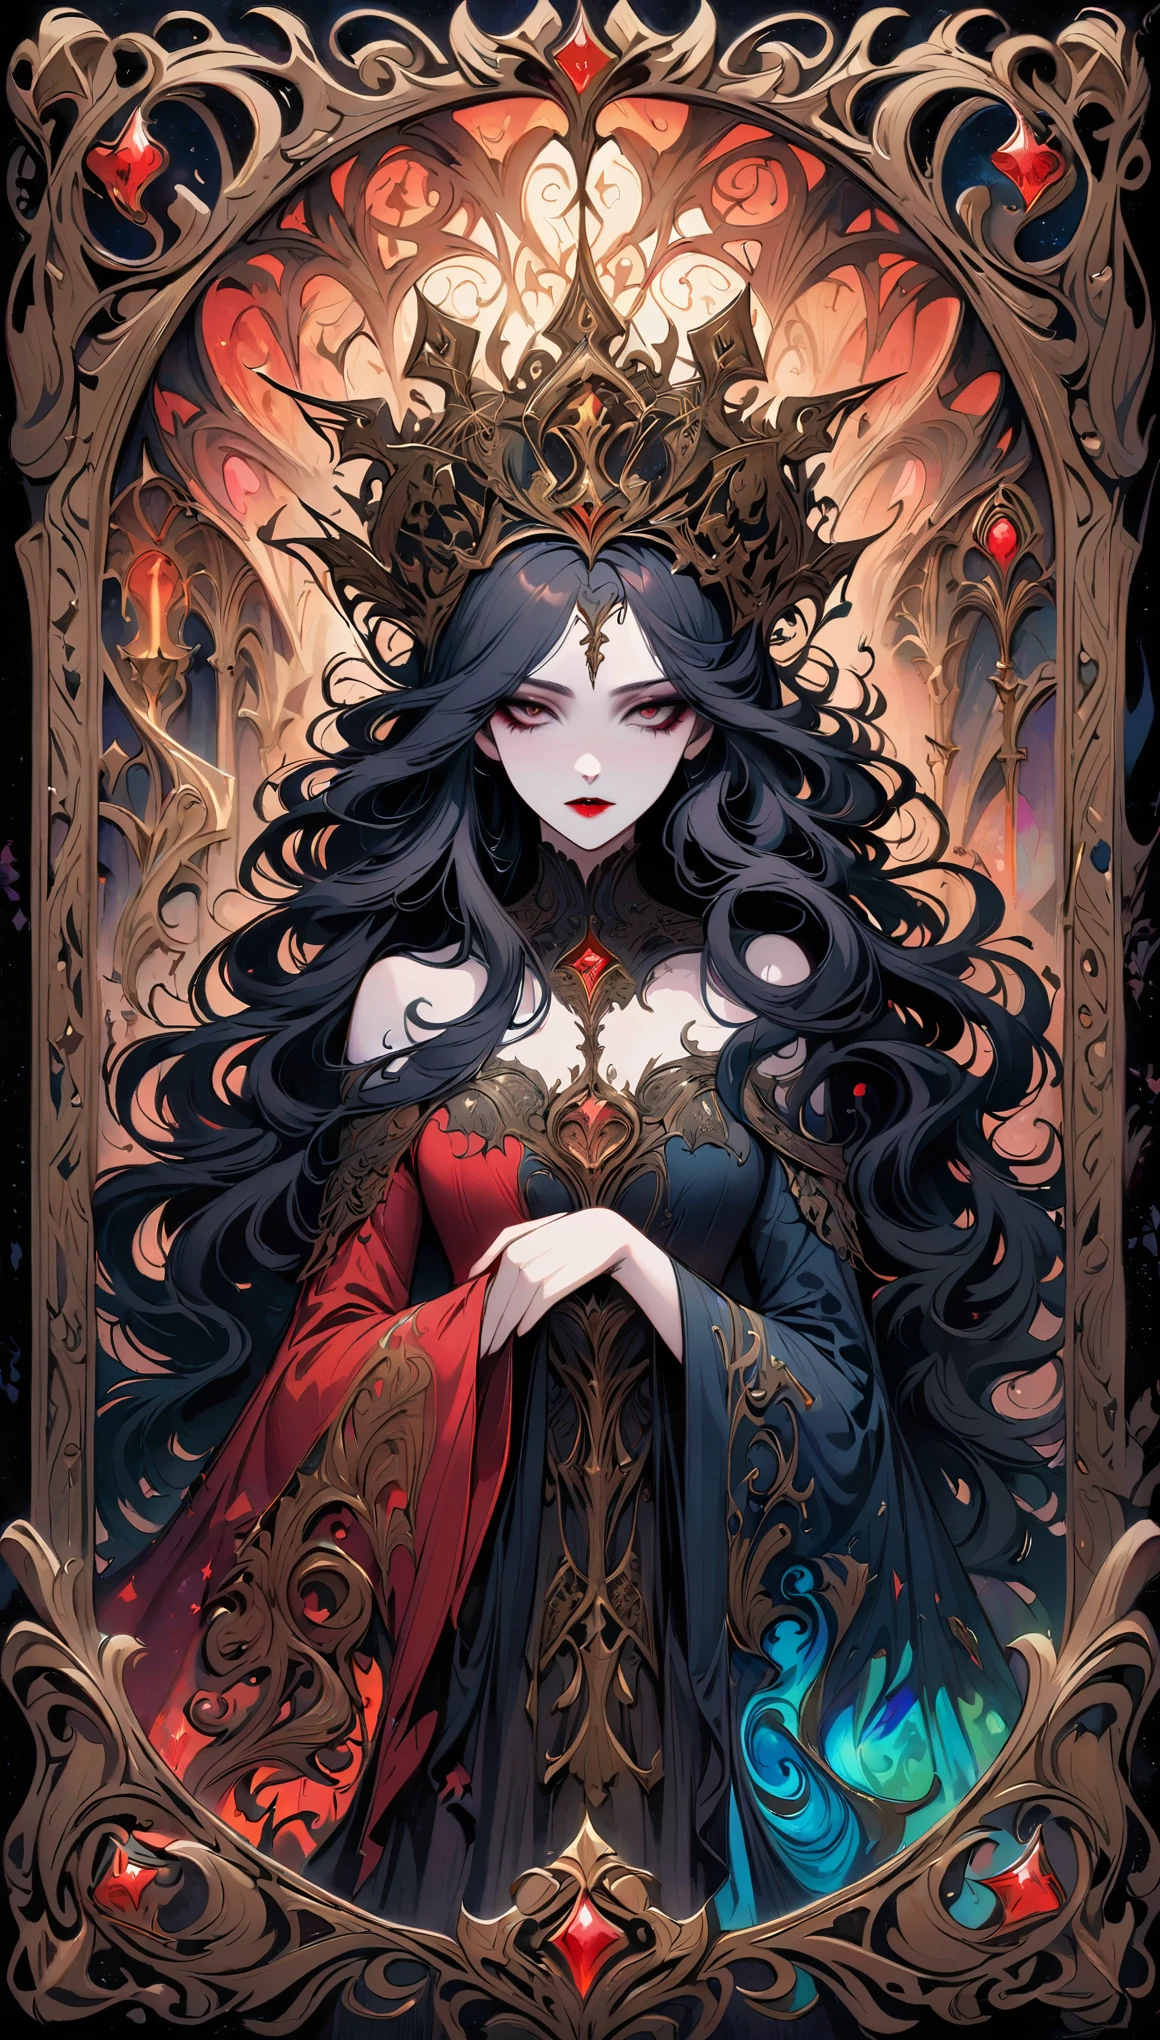 Tarot card: Mad Queen,dark fantasy,hauntingly beautiful,vivid colors,gothic horror,macabre atmosphere,fluid strokes,great attention to detail,fine linework,elaborately designed tarot card with intricate patterns,creepy and mesmerizing,richly textured,dramatic lighting,mysterious aura,distinctive style,exquisite artwork,shadowy background,mystical symbols,emotive expression,captivating gaze,feathered headdress,pale complexion,demonic features,long flowing hair with twisted strands,smoky eye makeup,intriguingly distorted face,dripping blood-red lipstick,ominous creatures lurking in the shadows,ethereal mist adding an otherworldly touch,moody tones enhancing the somber mood,impressive visual impact,foreboding vibe.